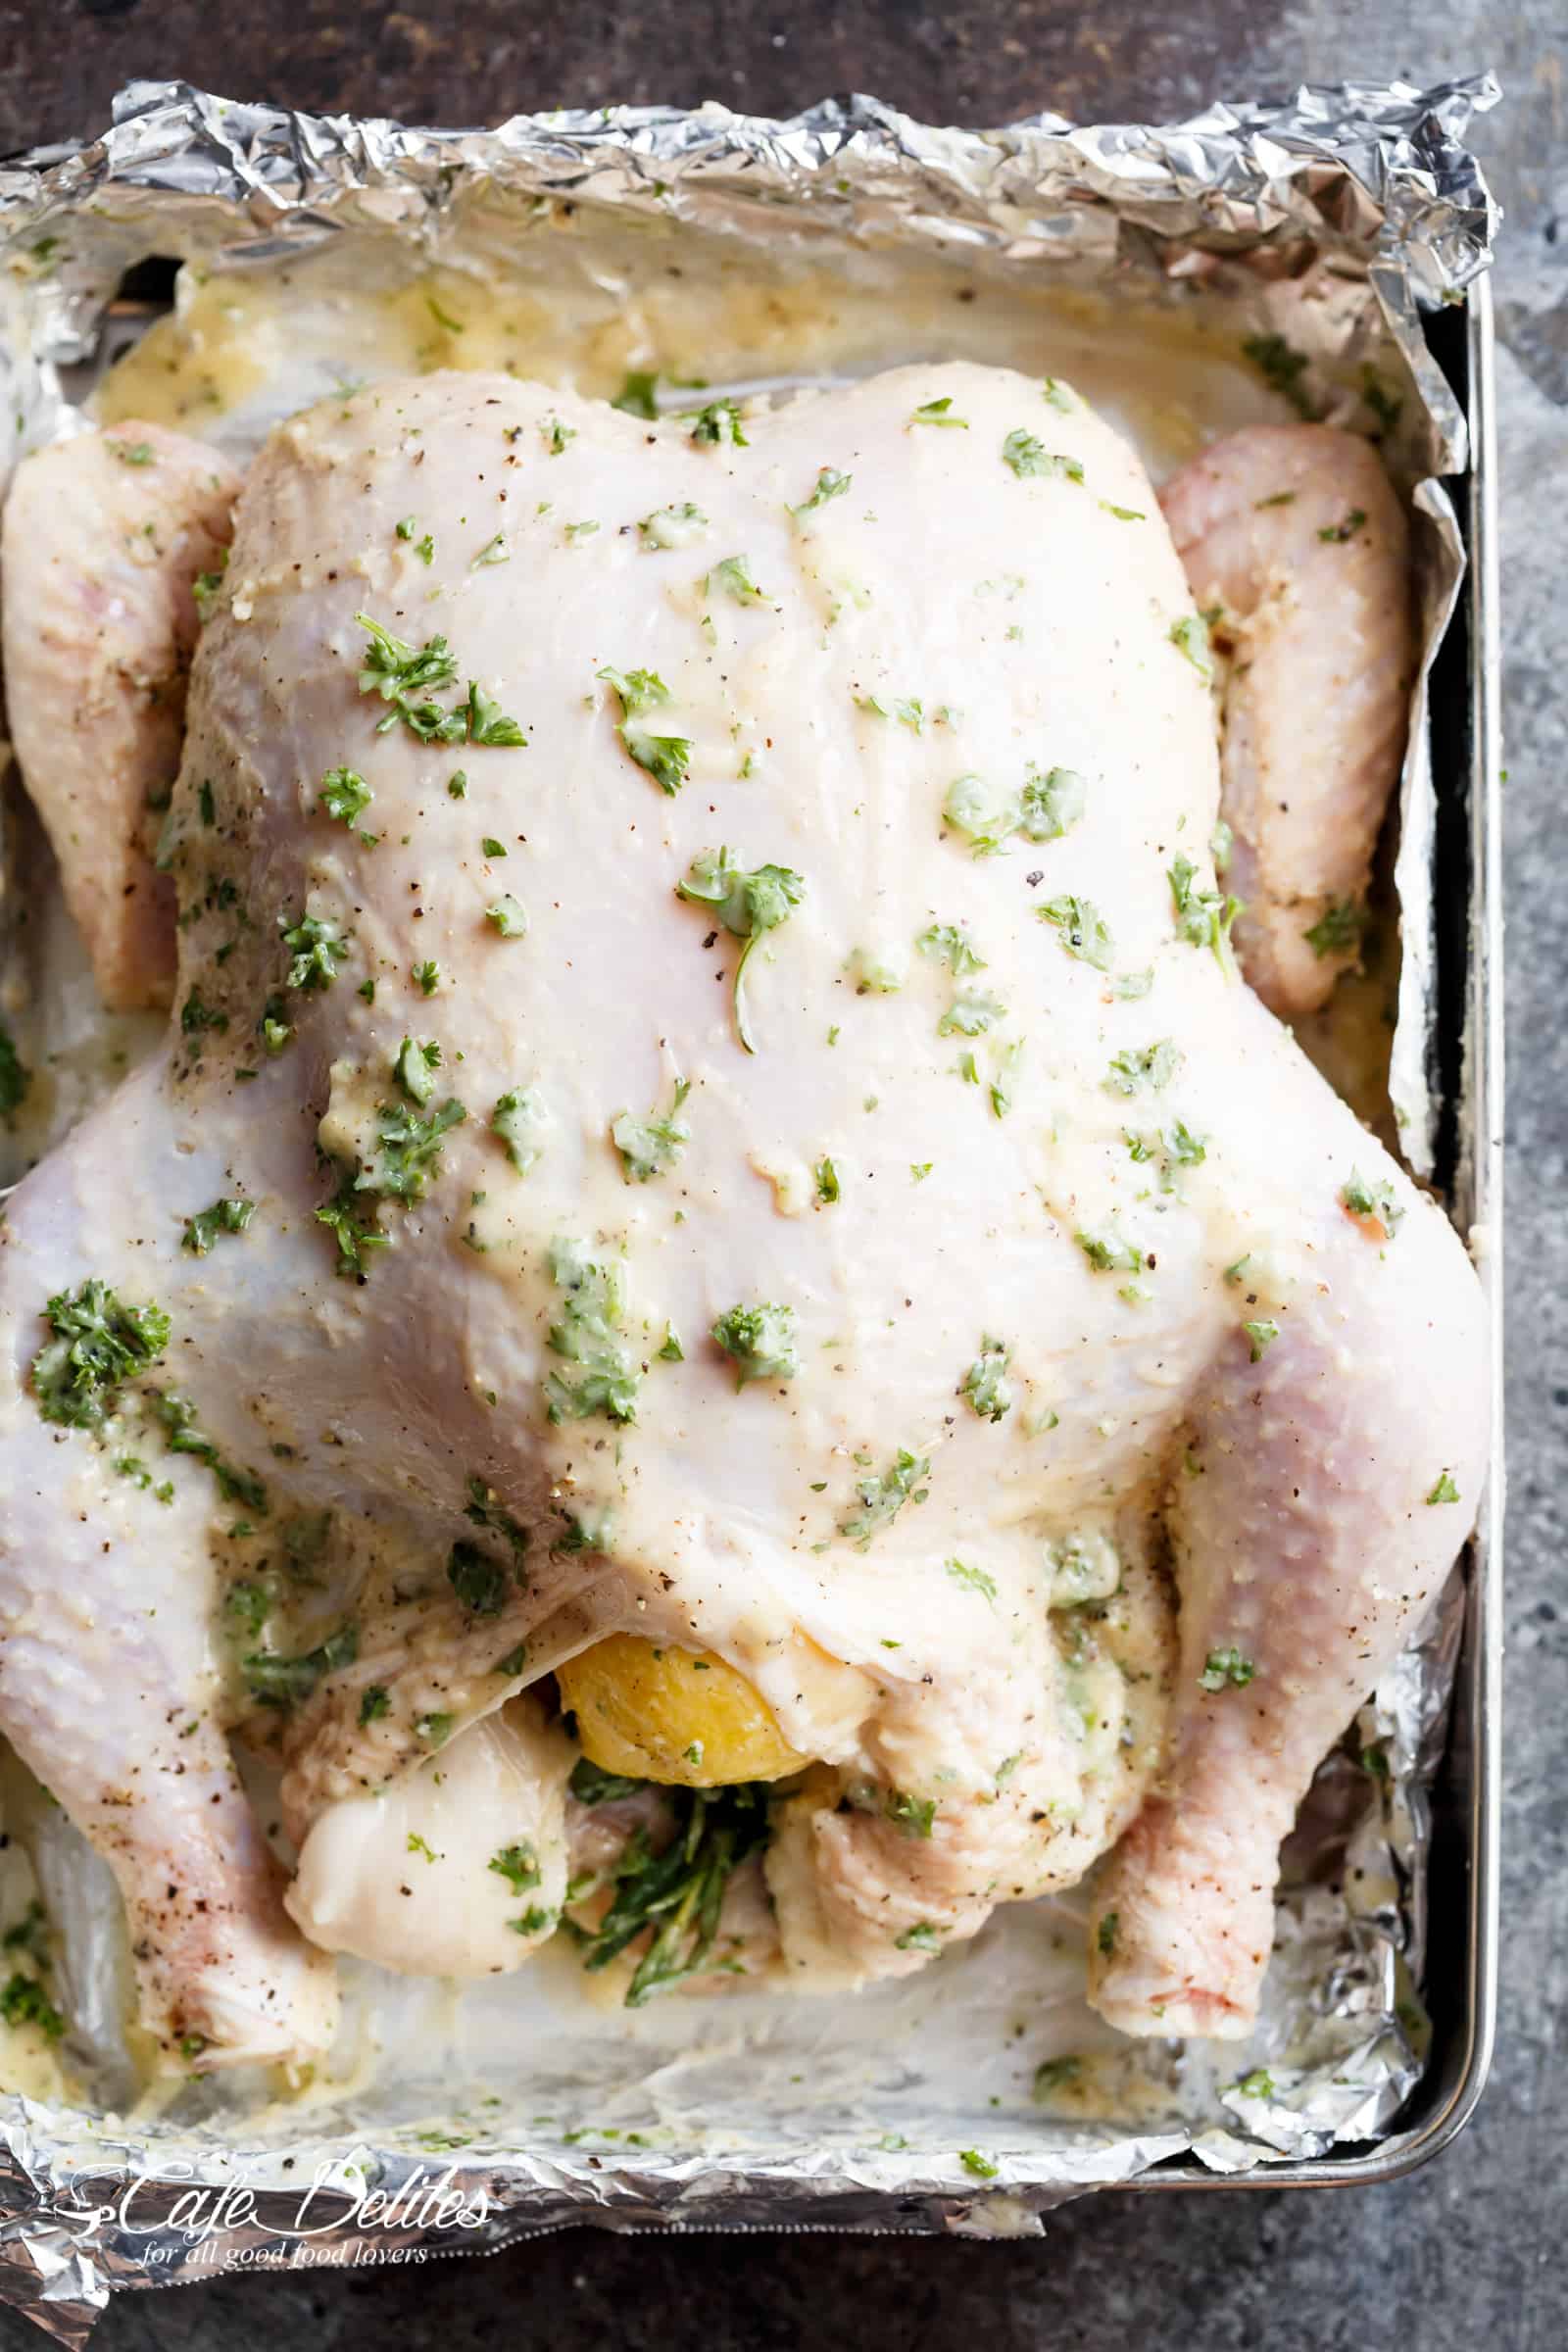 Roast chicken with garlic butter, rosemary, parsley, lemon, and a hint of white wine for an unbeatable flavour. | cafedelites.com